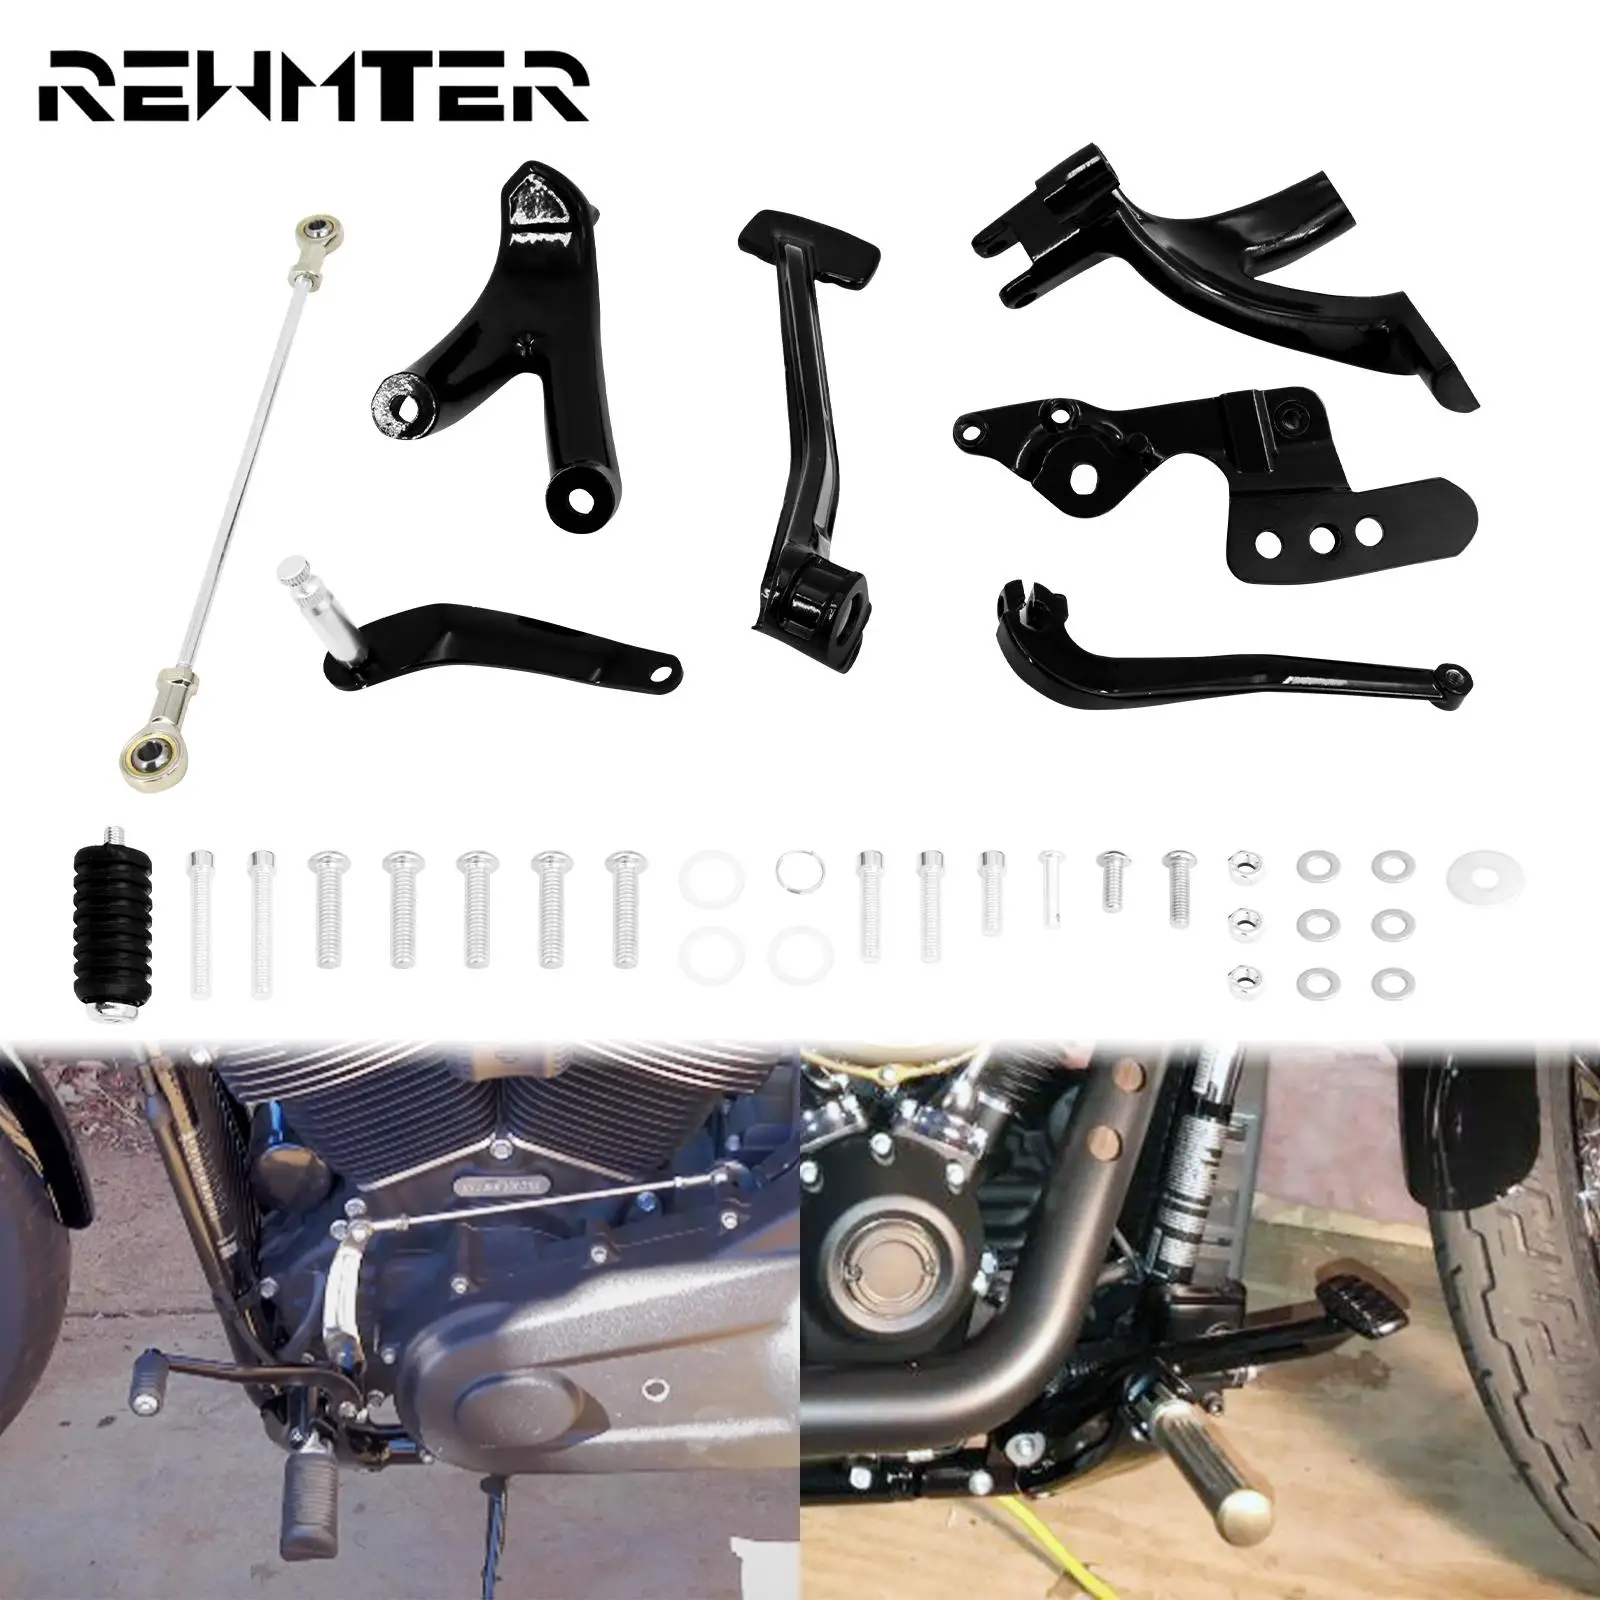 Motorcycle Billet Aluminum Forward Controls Kits Foot Pegs Rest For Harley - $182.91